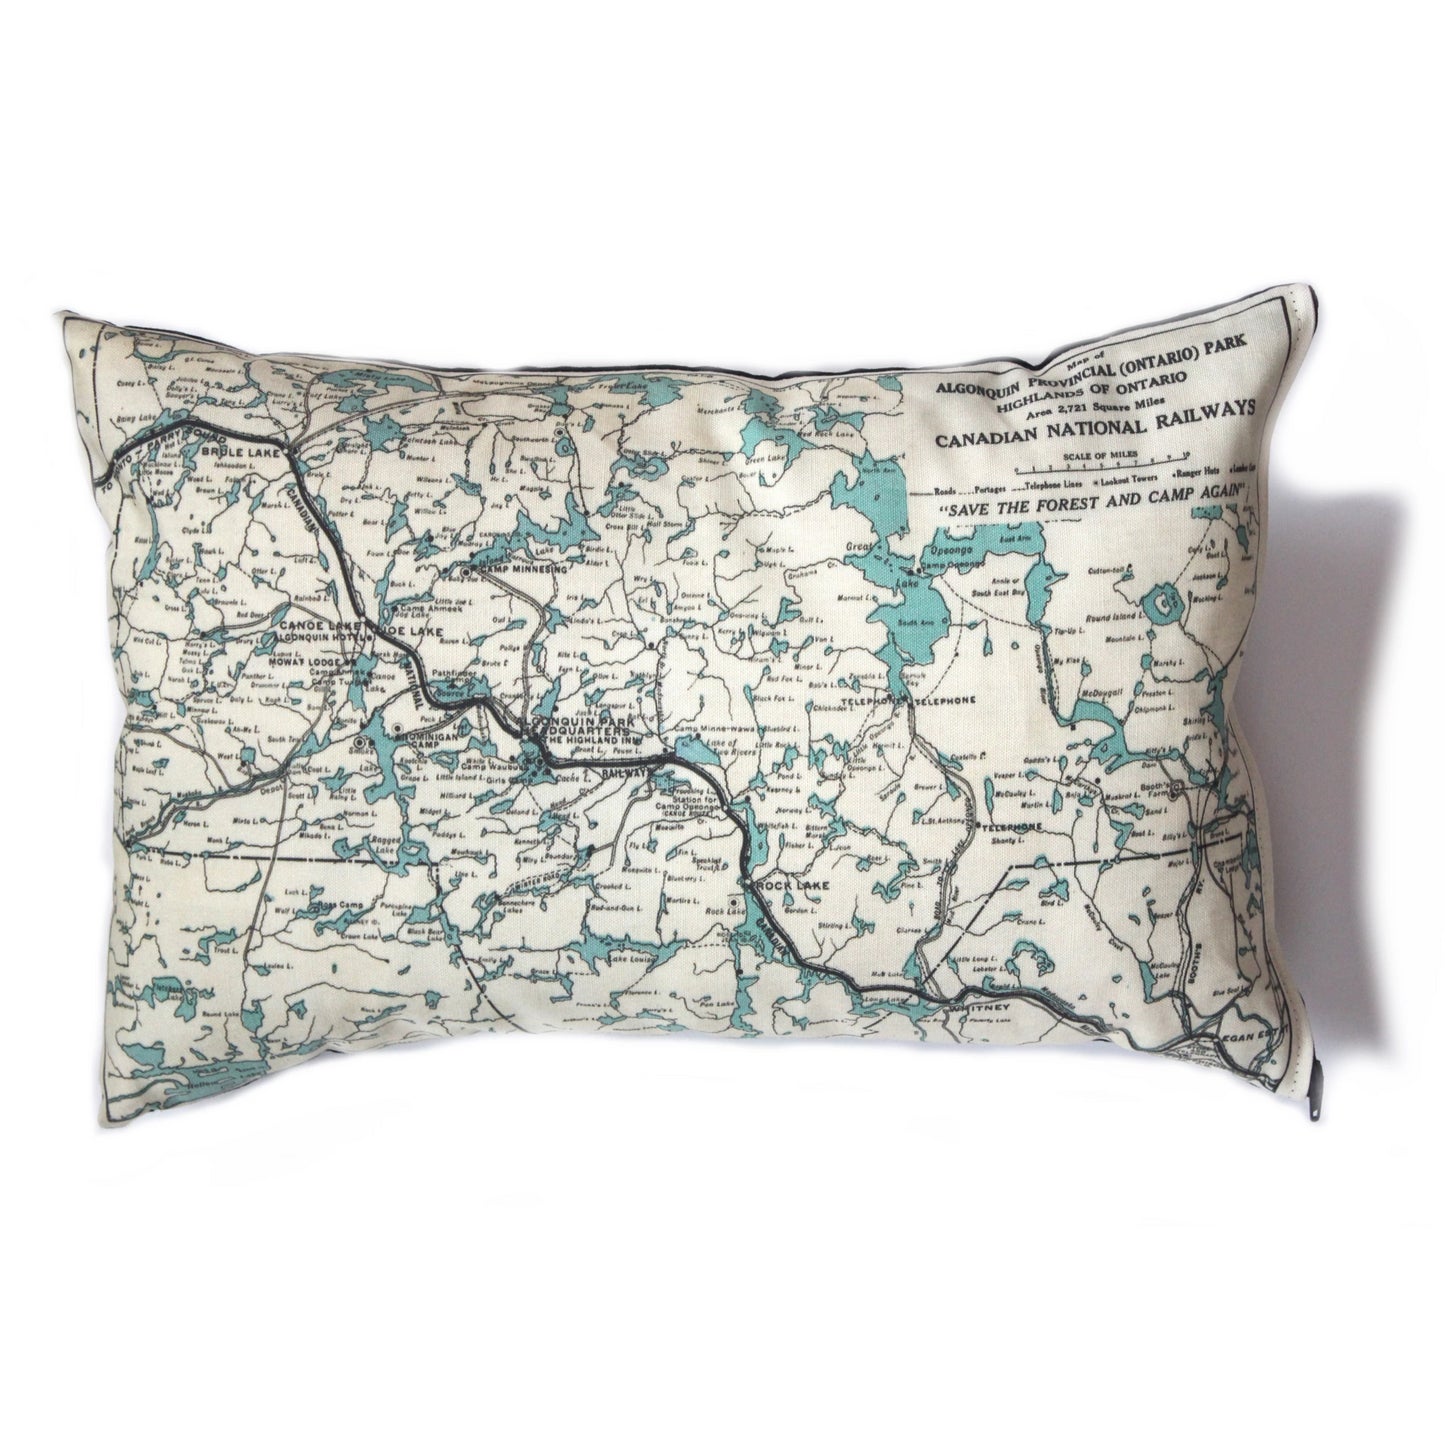 Made in Canada linen pillow case with hand printed vintage map of Algonquin Park in Ontario, Canada.